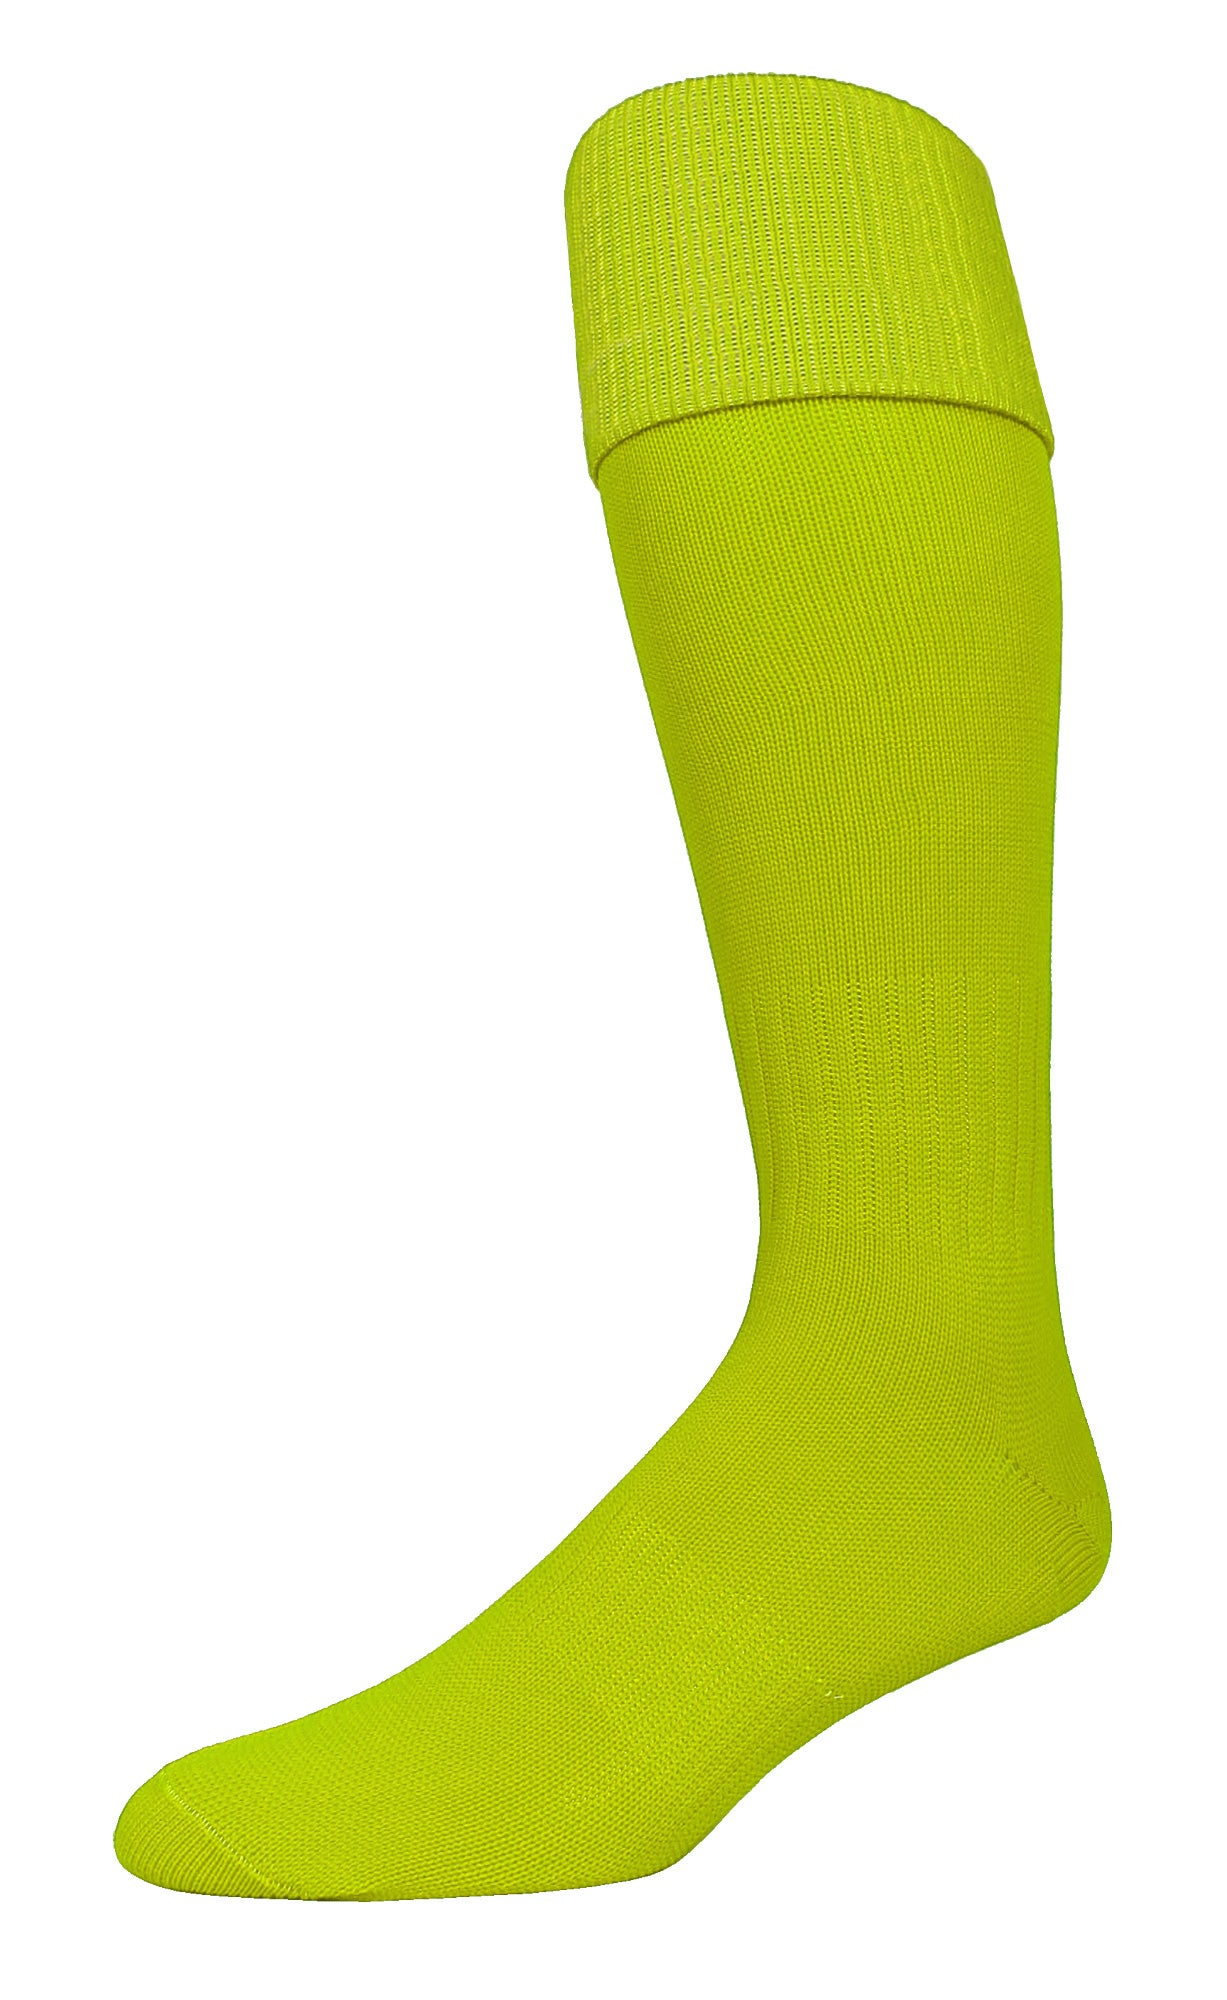 Pearsox Euro Solid Color Knee High Athletic Socks